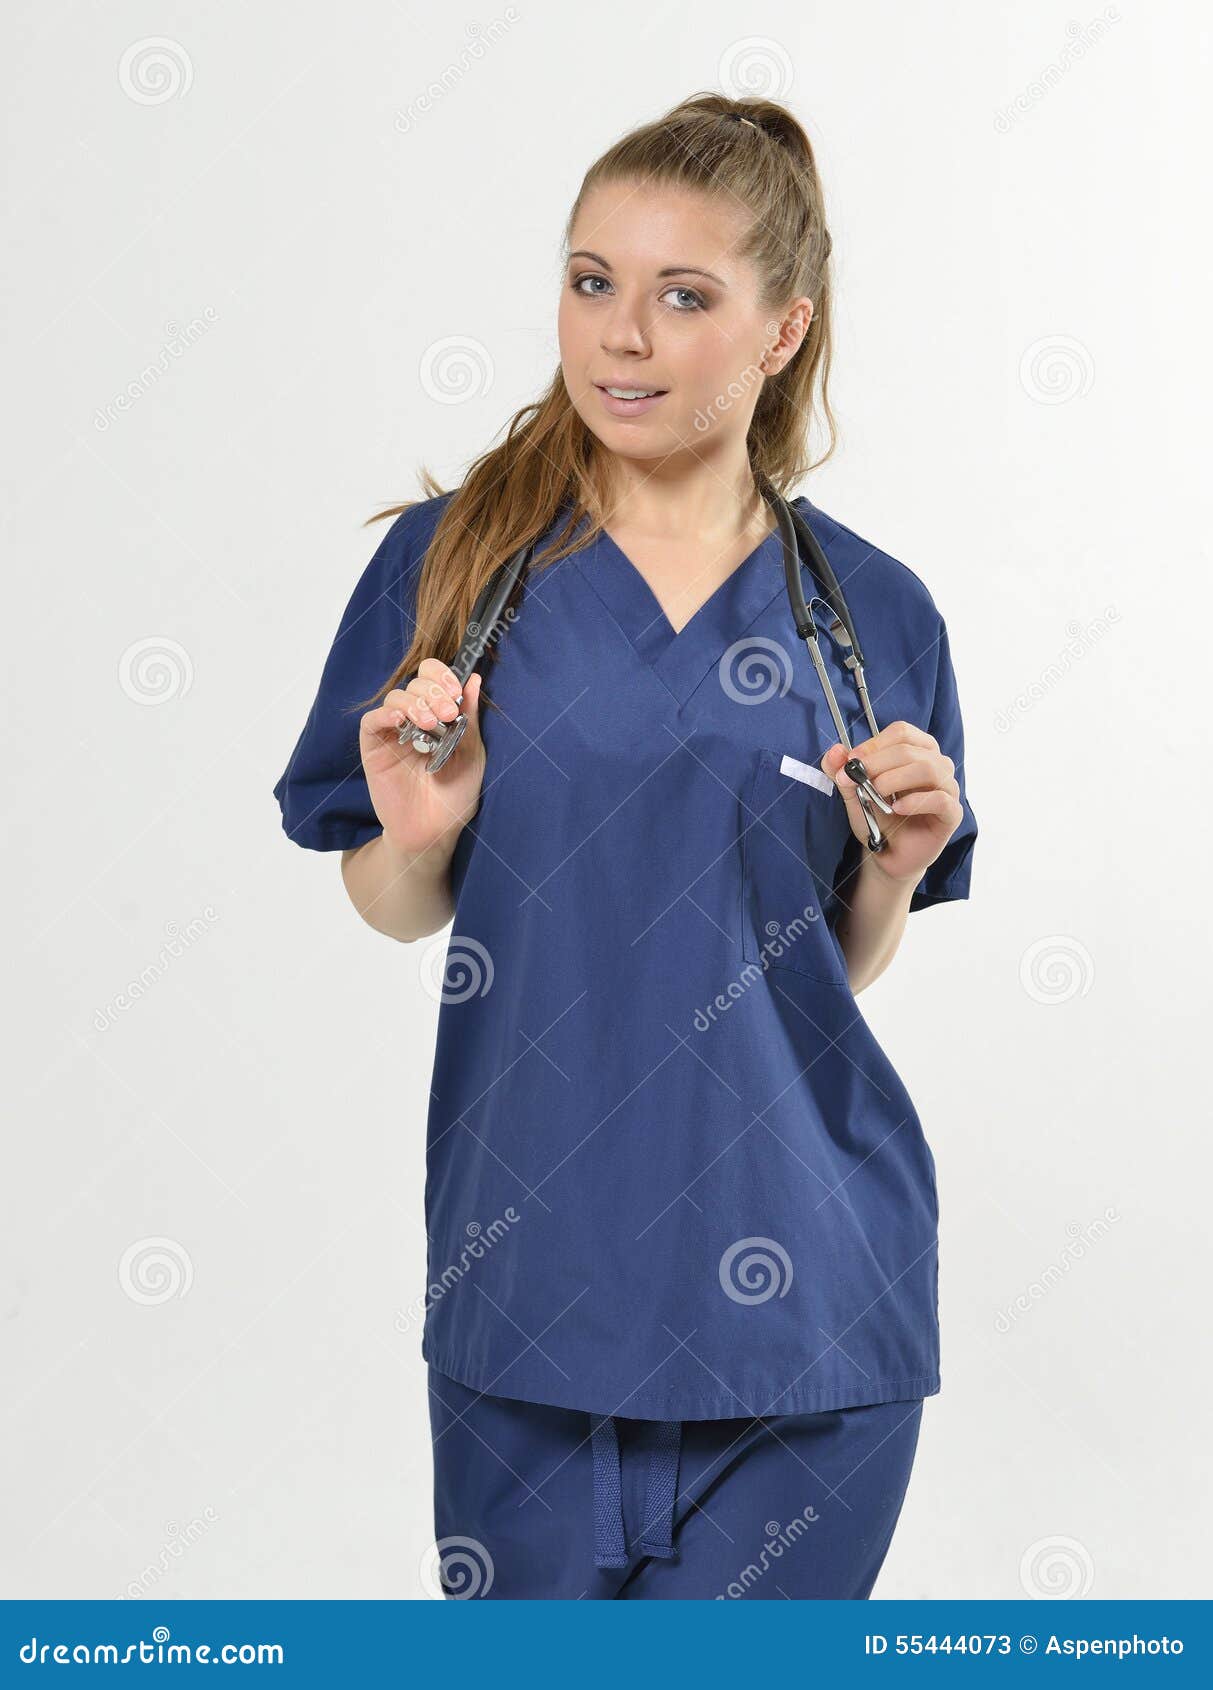 Beautiful Young Female Healthcare Professional Stock Image - Image of ...